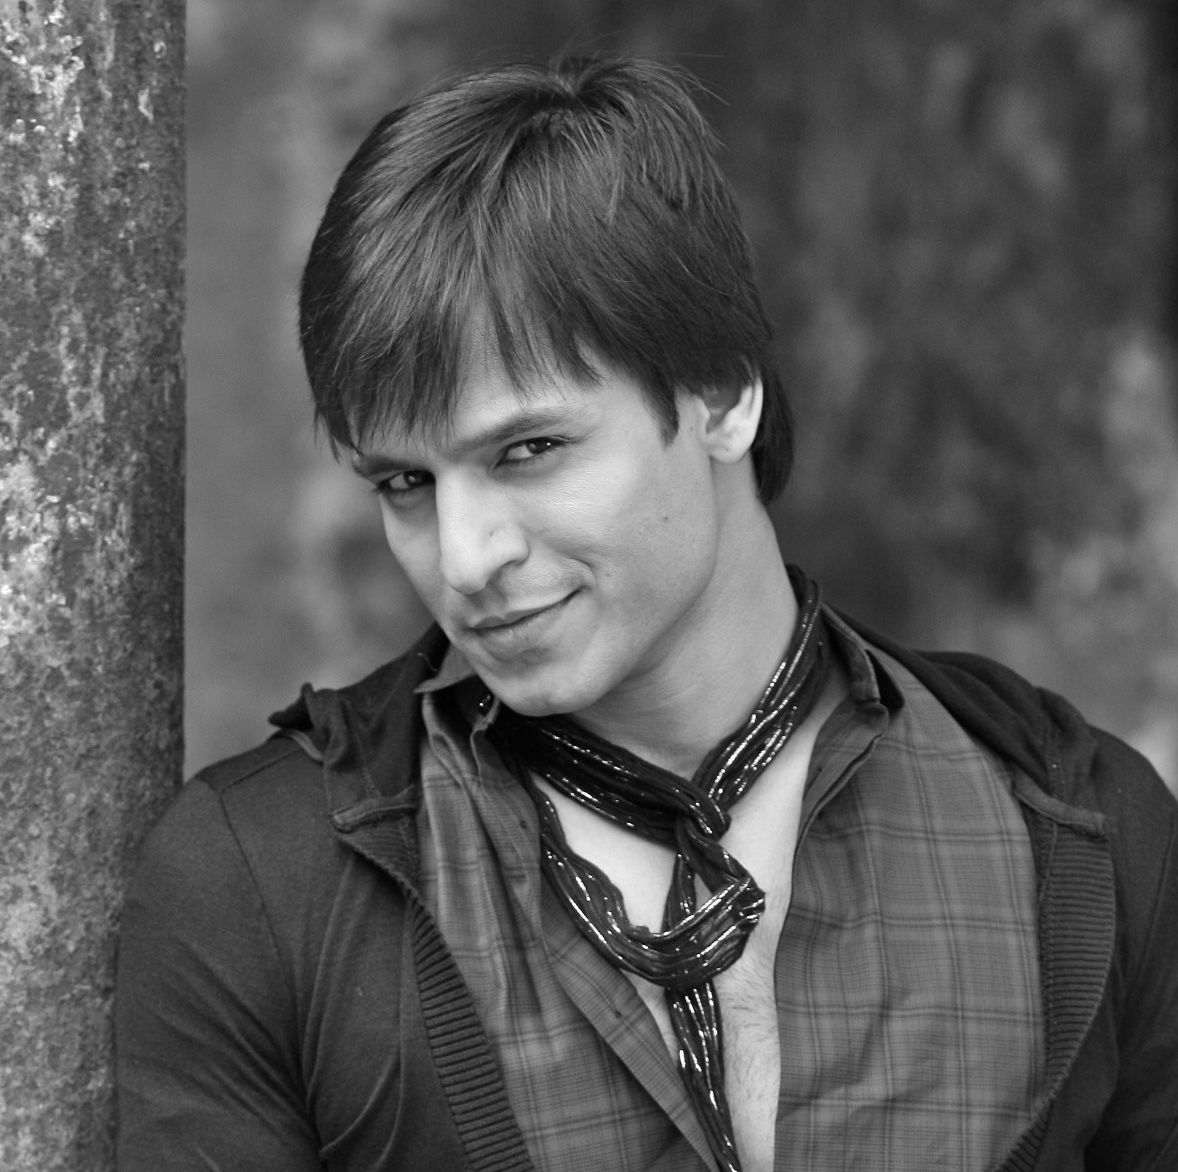 Vivek Oberoi in legal troubles over Service Tax Evasion